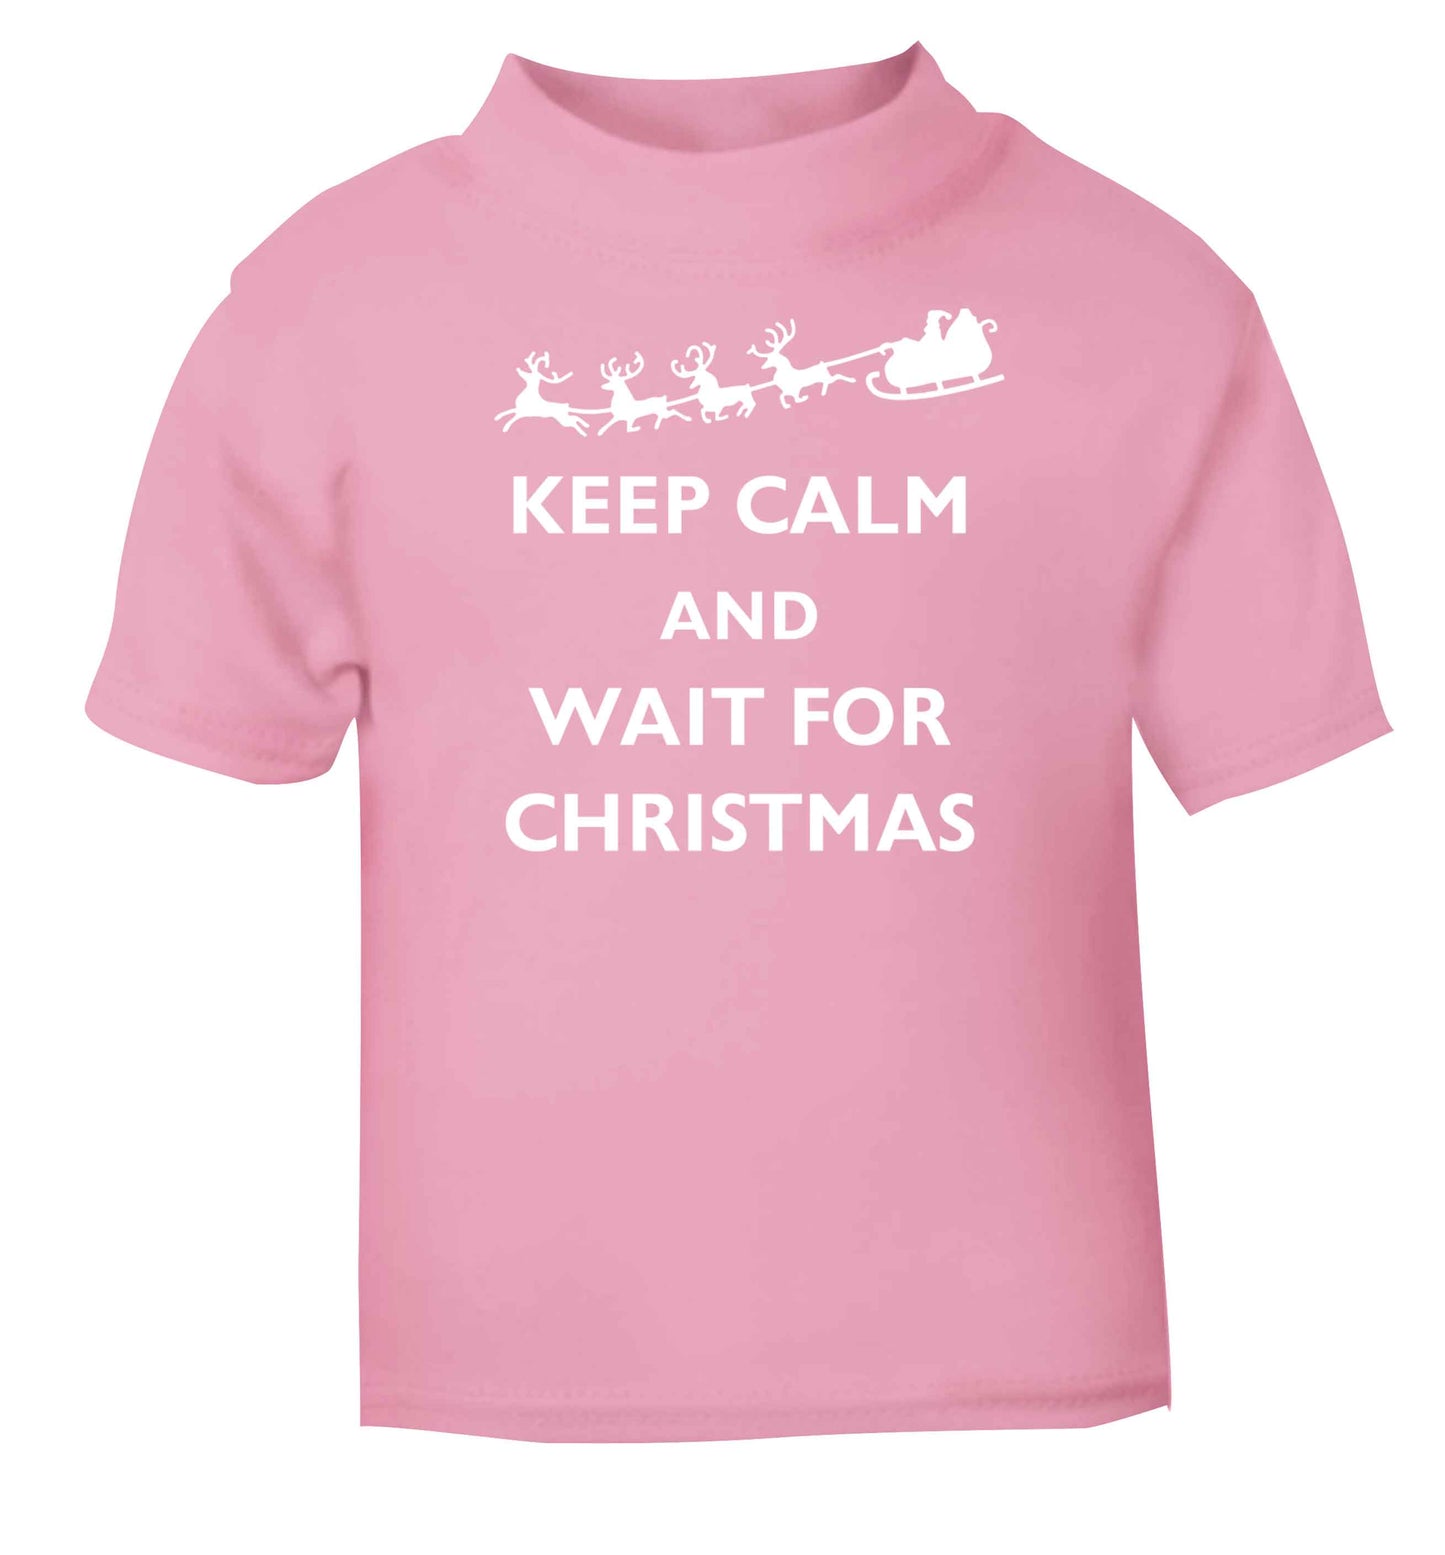 Keep calm and wait for Christmas light pink baby toddler Tshirt 2 Years